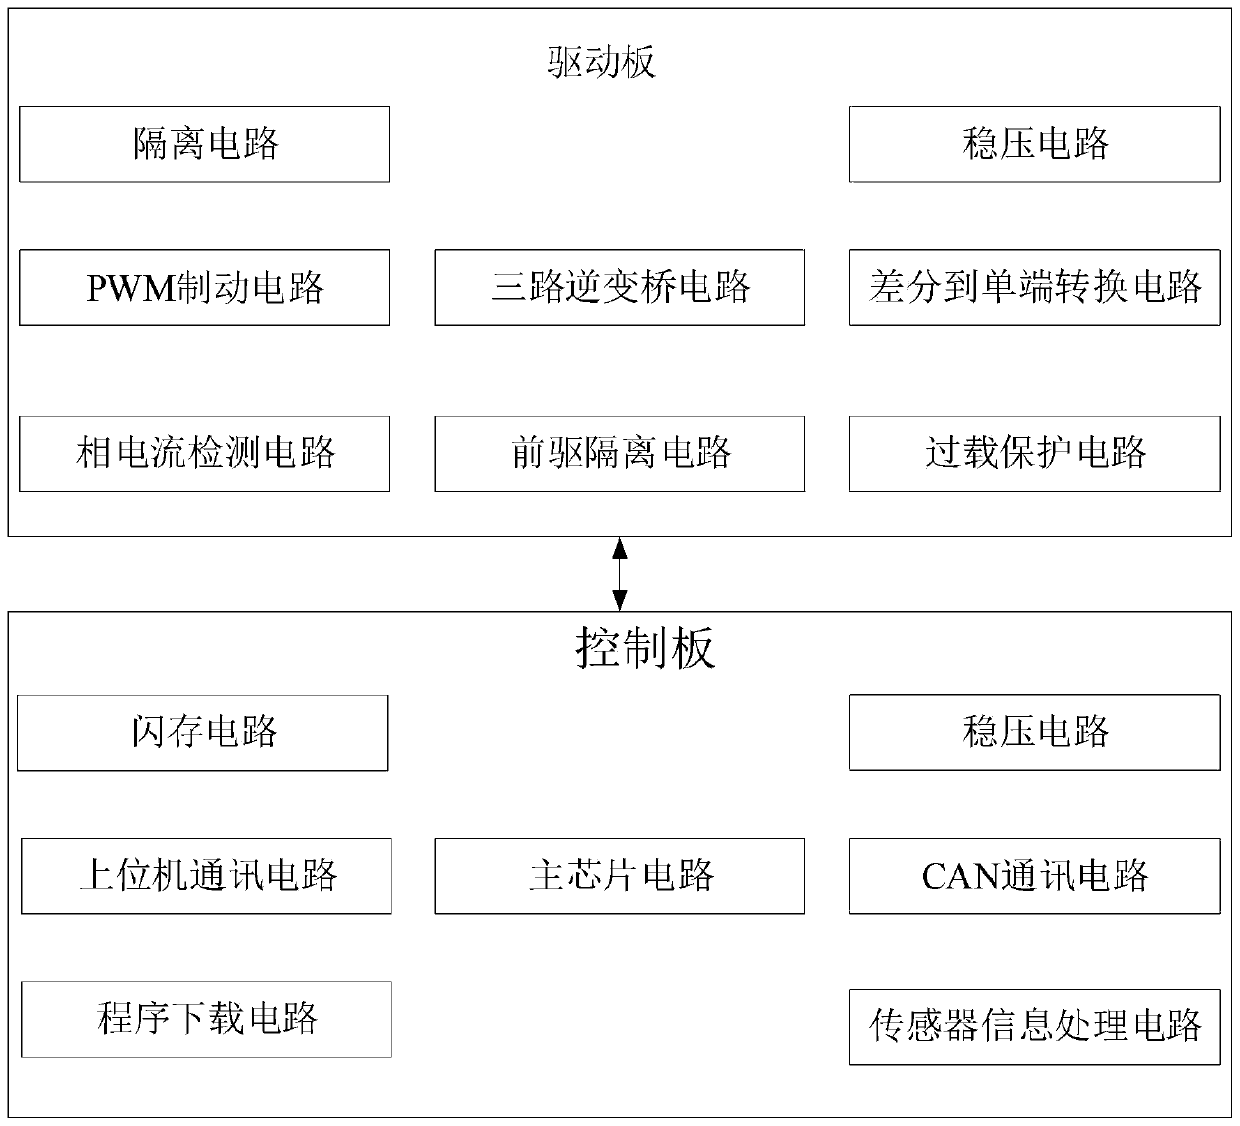 Restructuring collaborative robot joint integrated drive control system, method and application